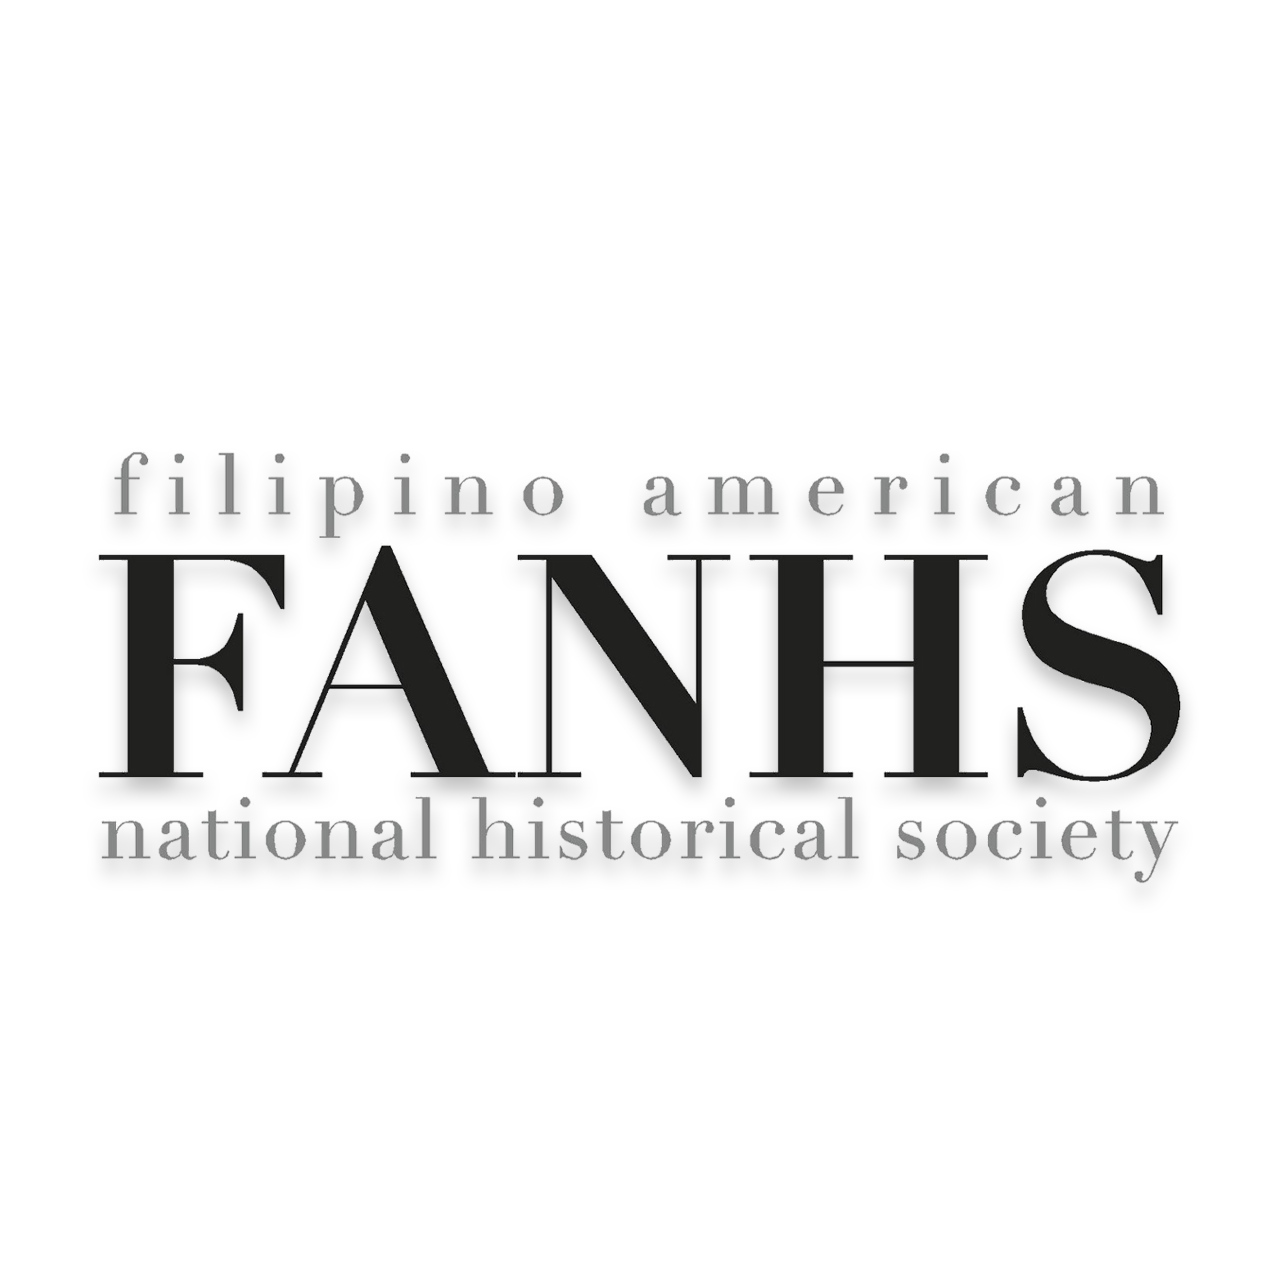 SAVE THE DATE! The FANHS National Conference will be August 11 – 13, 2022, Seattle University in Seattle, WA